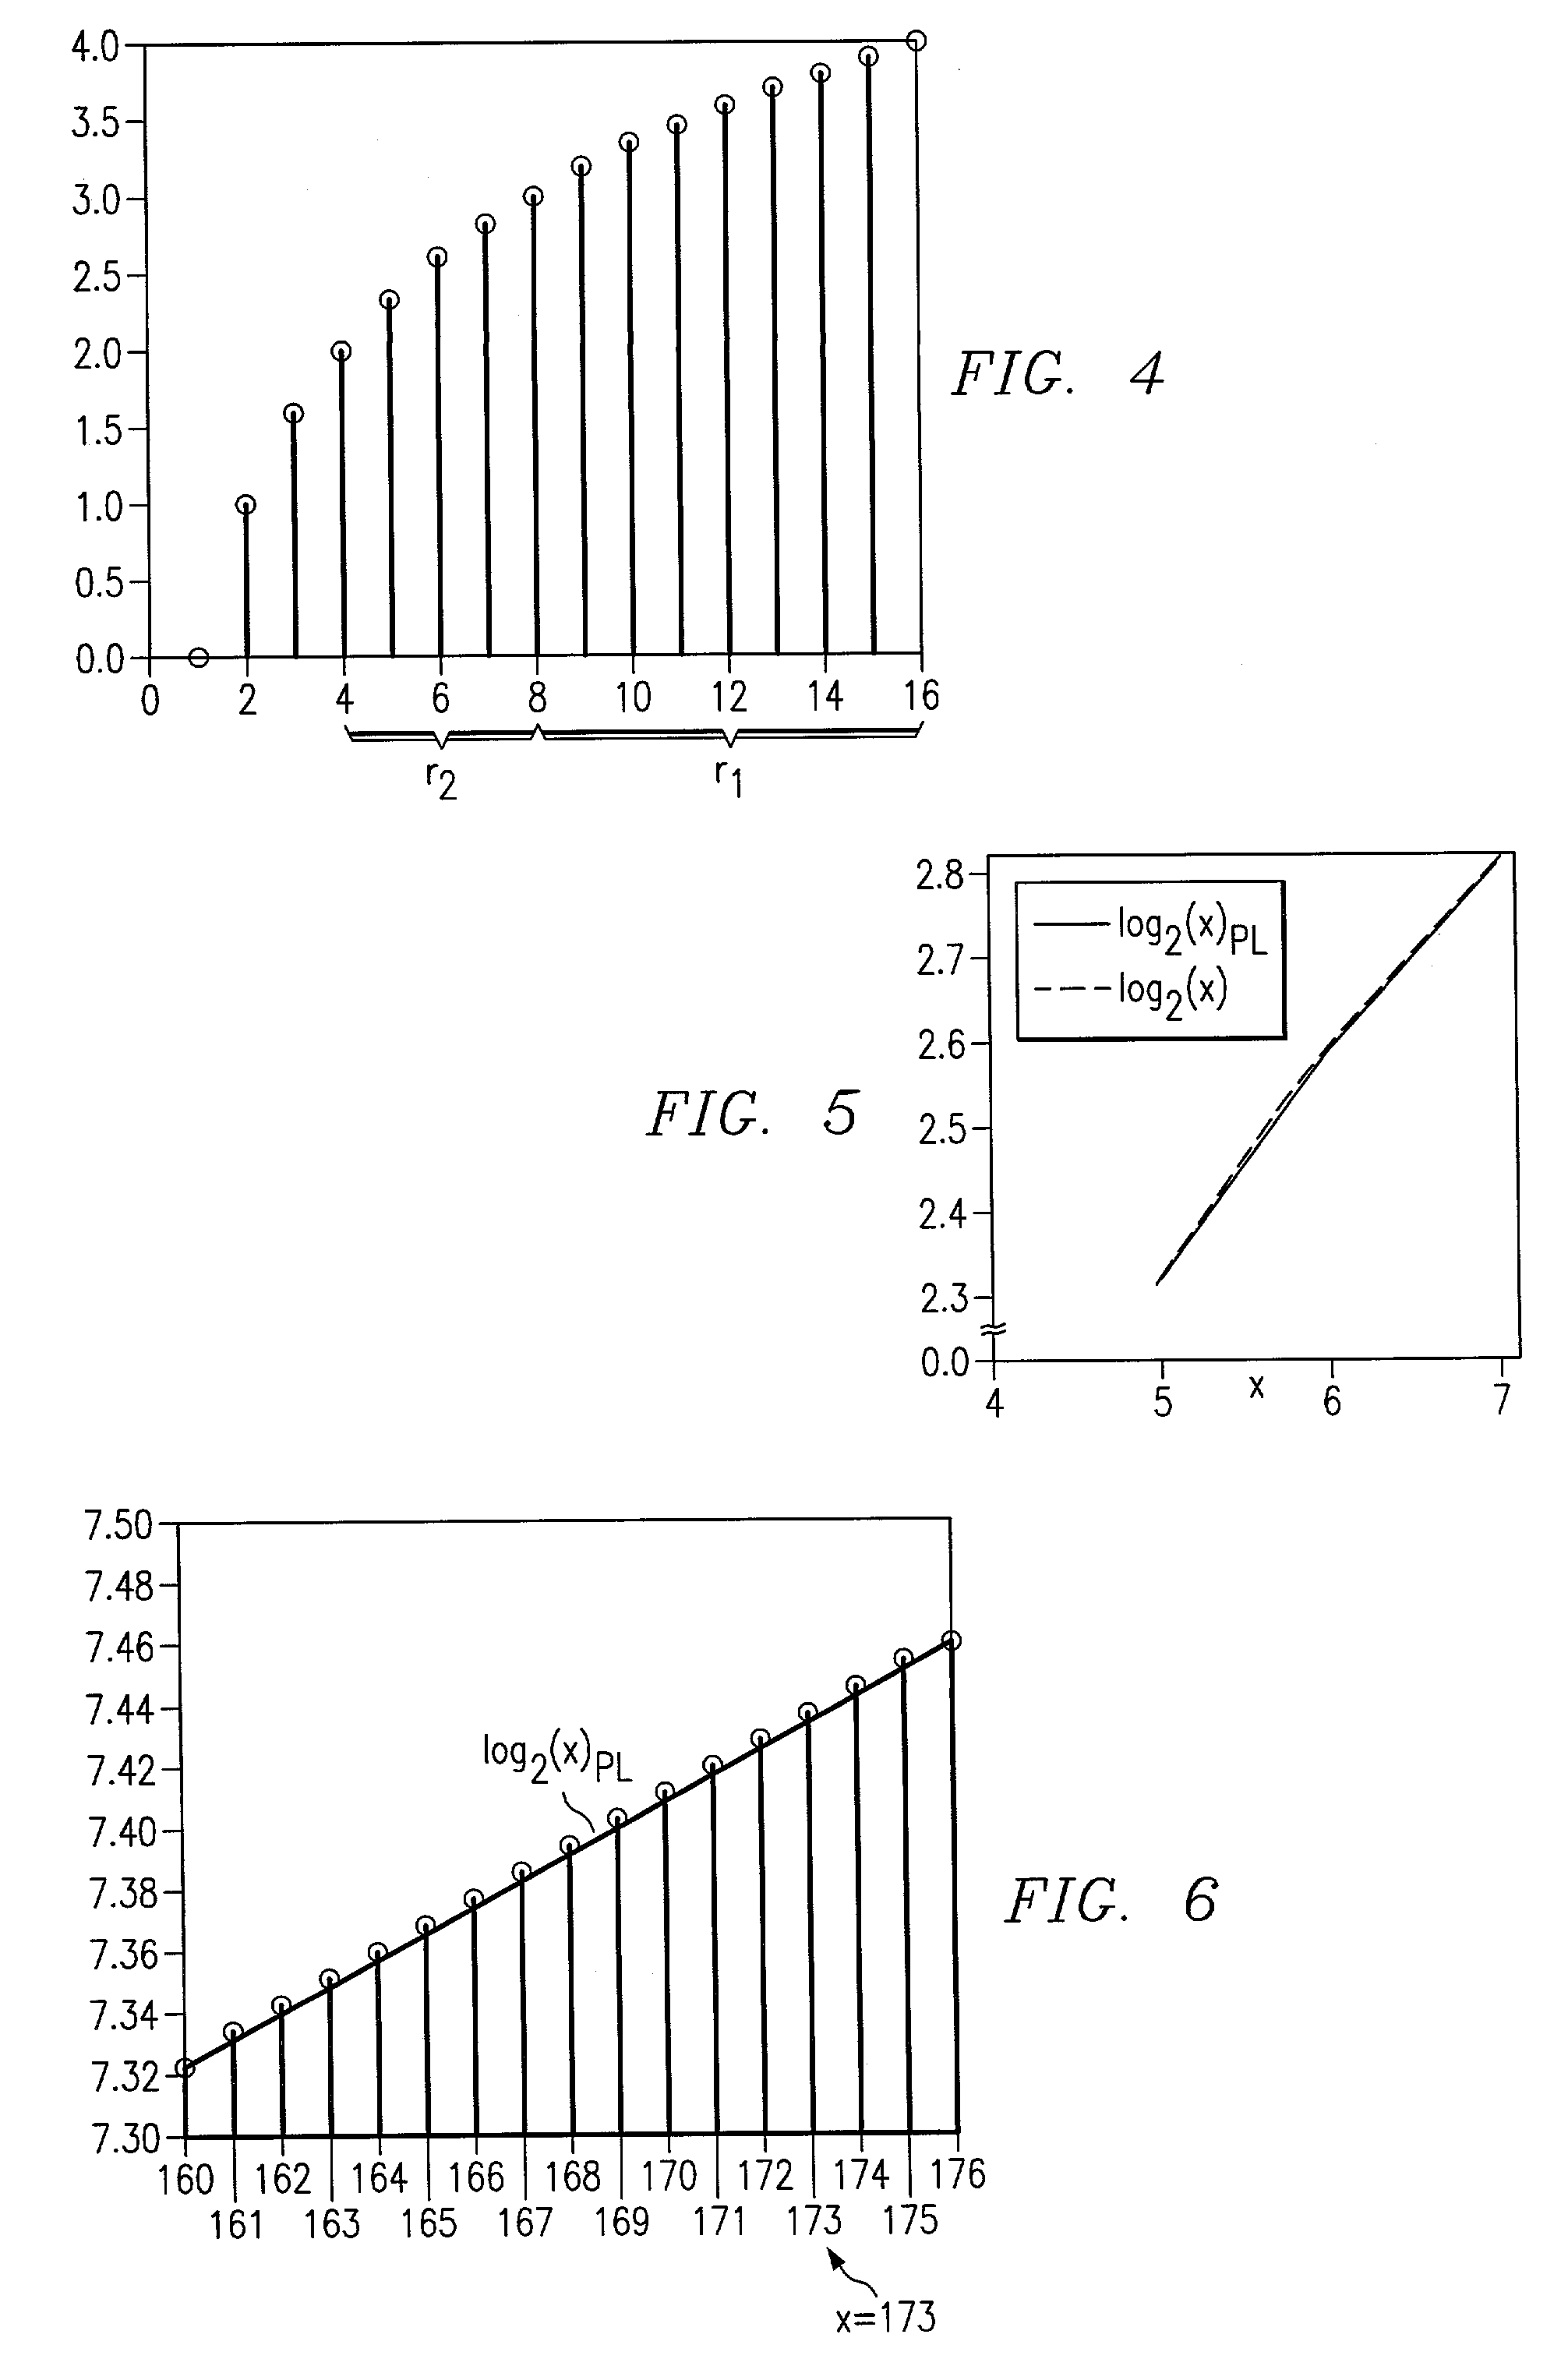 Circuits, systems, and methods implementing approximations for logarithm, inverse logarithm, and reciprocal